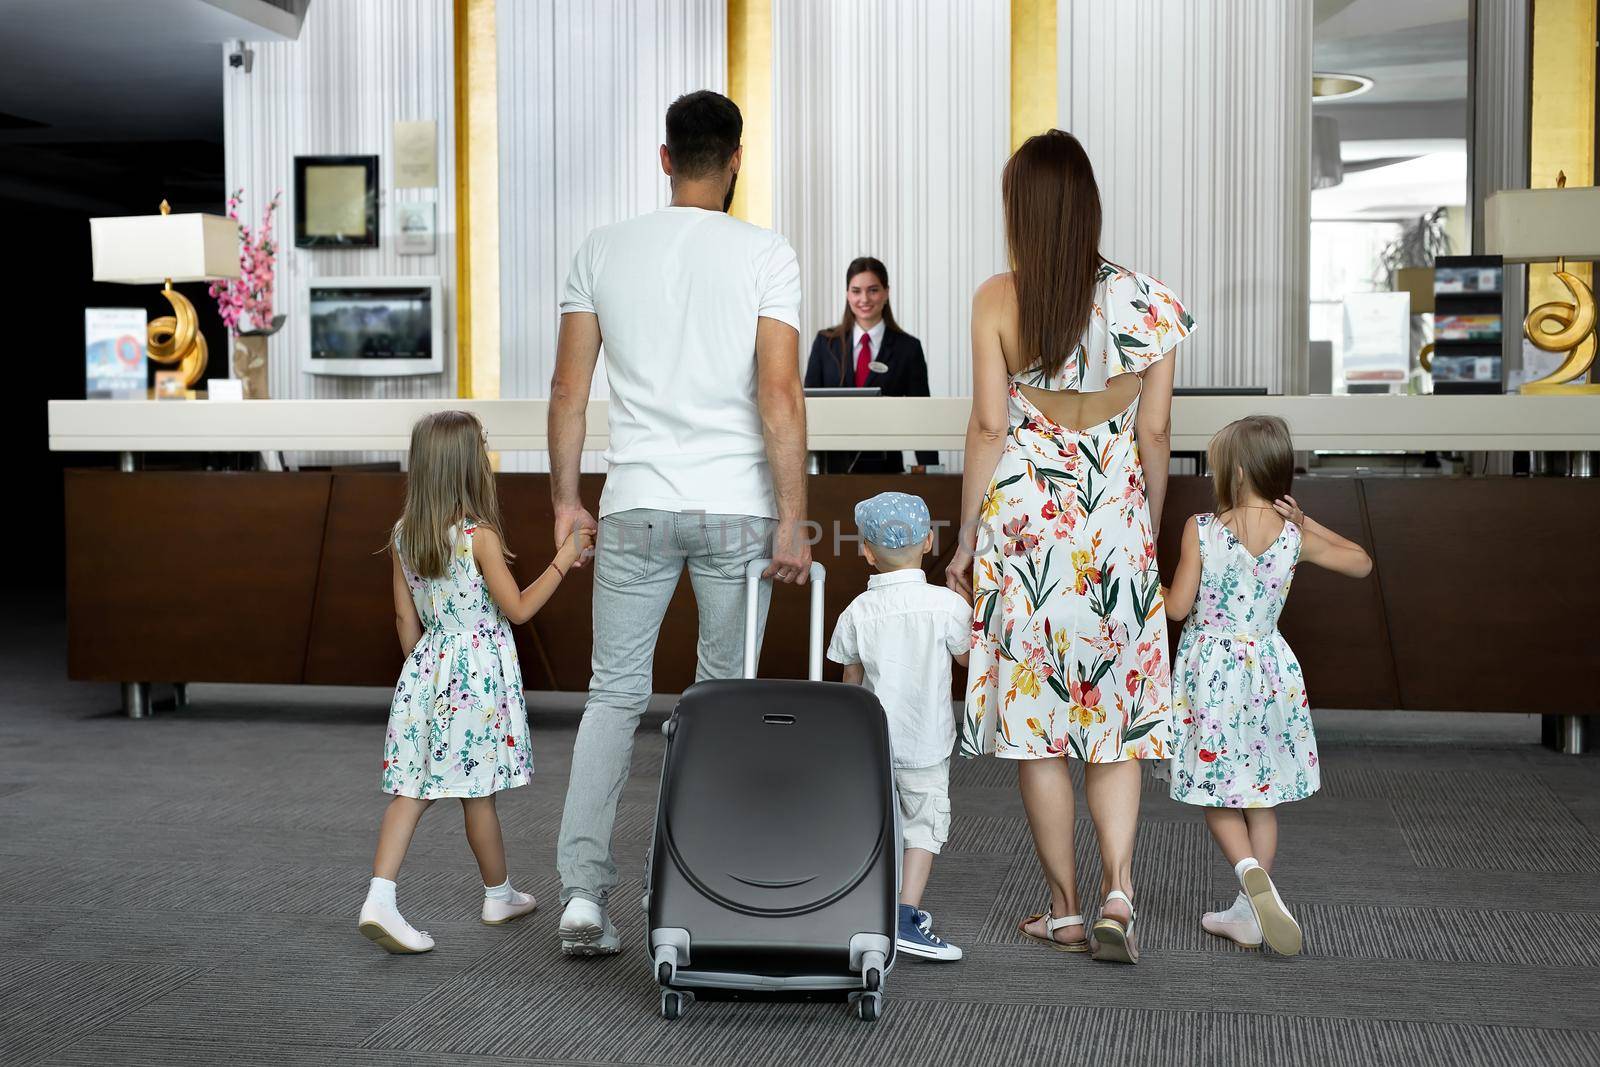 Family of five enters to the hotel lobby to check in at the reception for vacation by StudioPeace